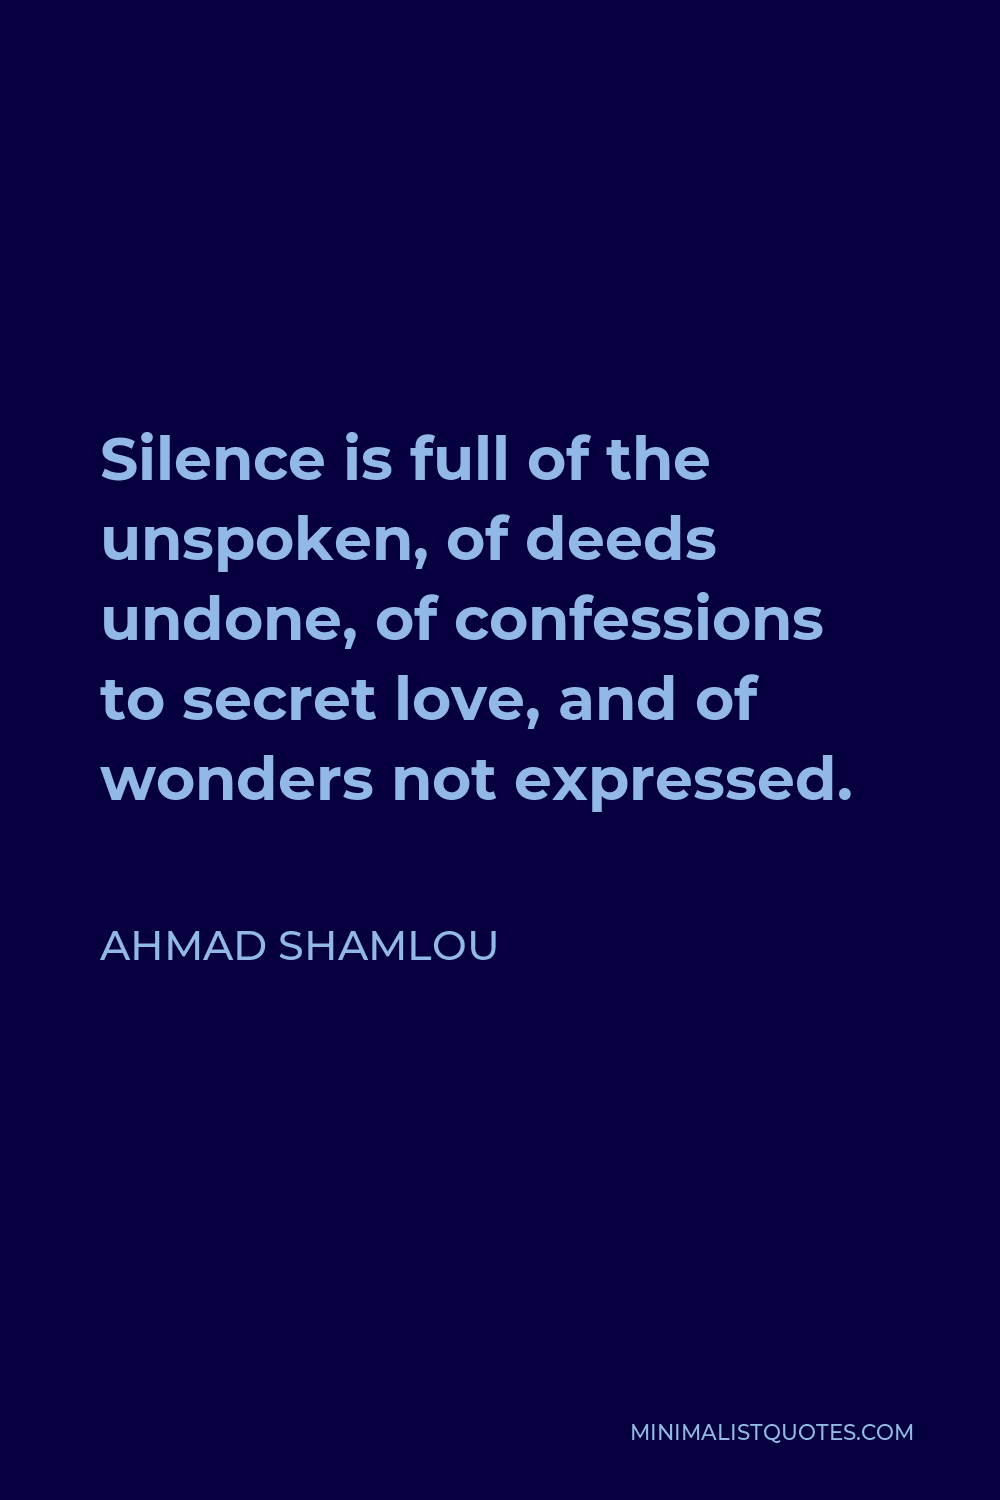 Ahmad Shamlou Quote - Silence is full of the unspoken, of deeds undone, of confessions to secret love, and of wonders not expressed.